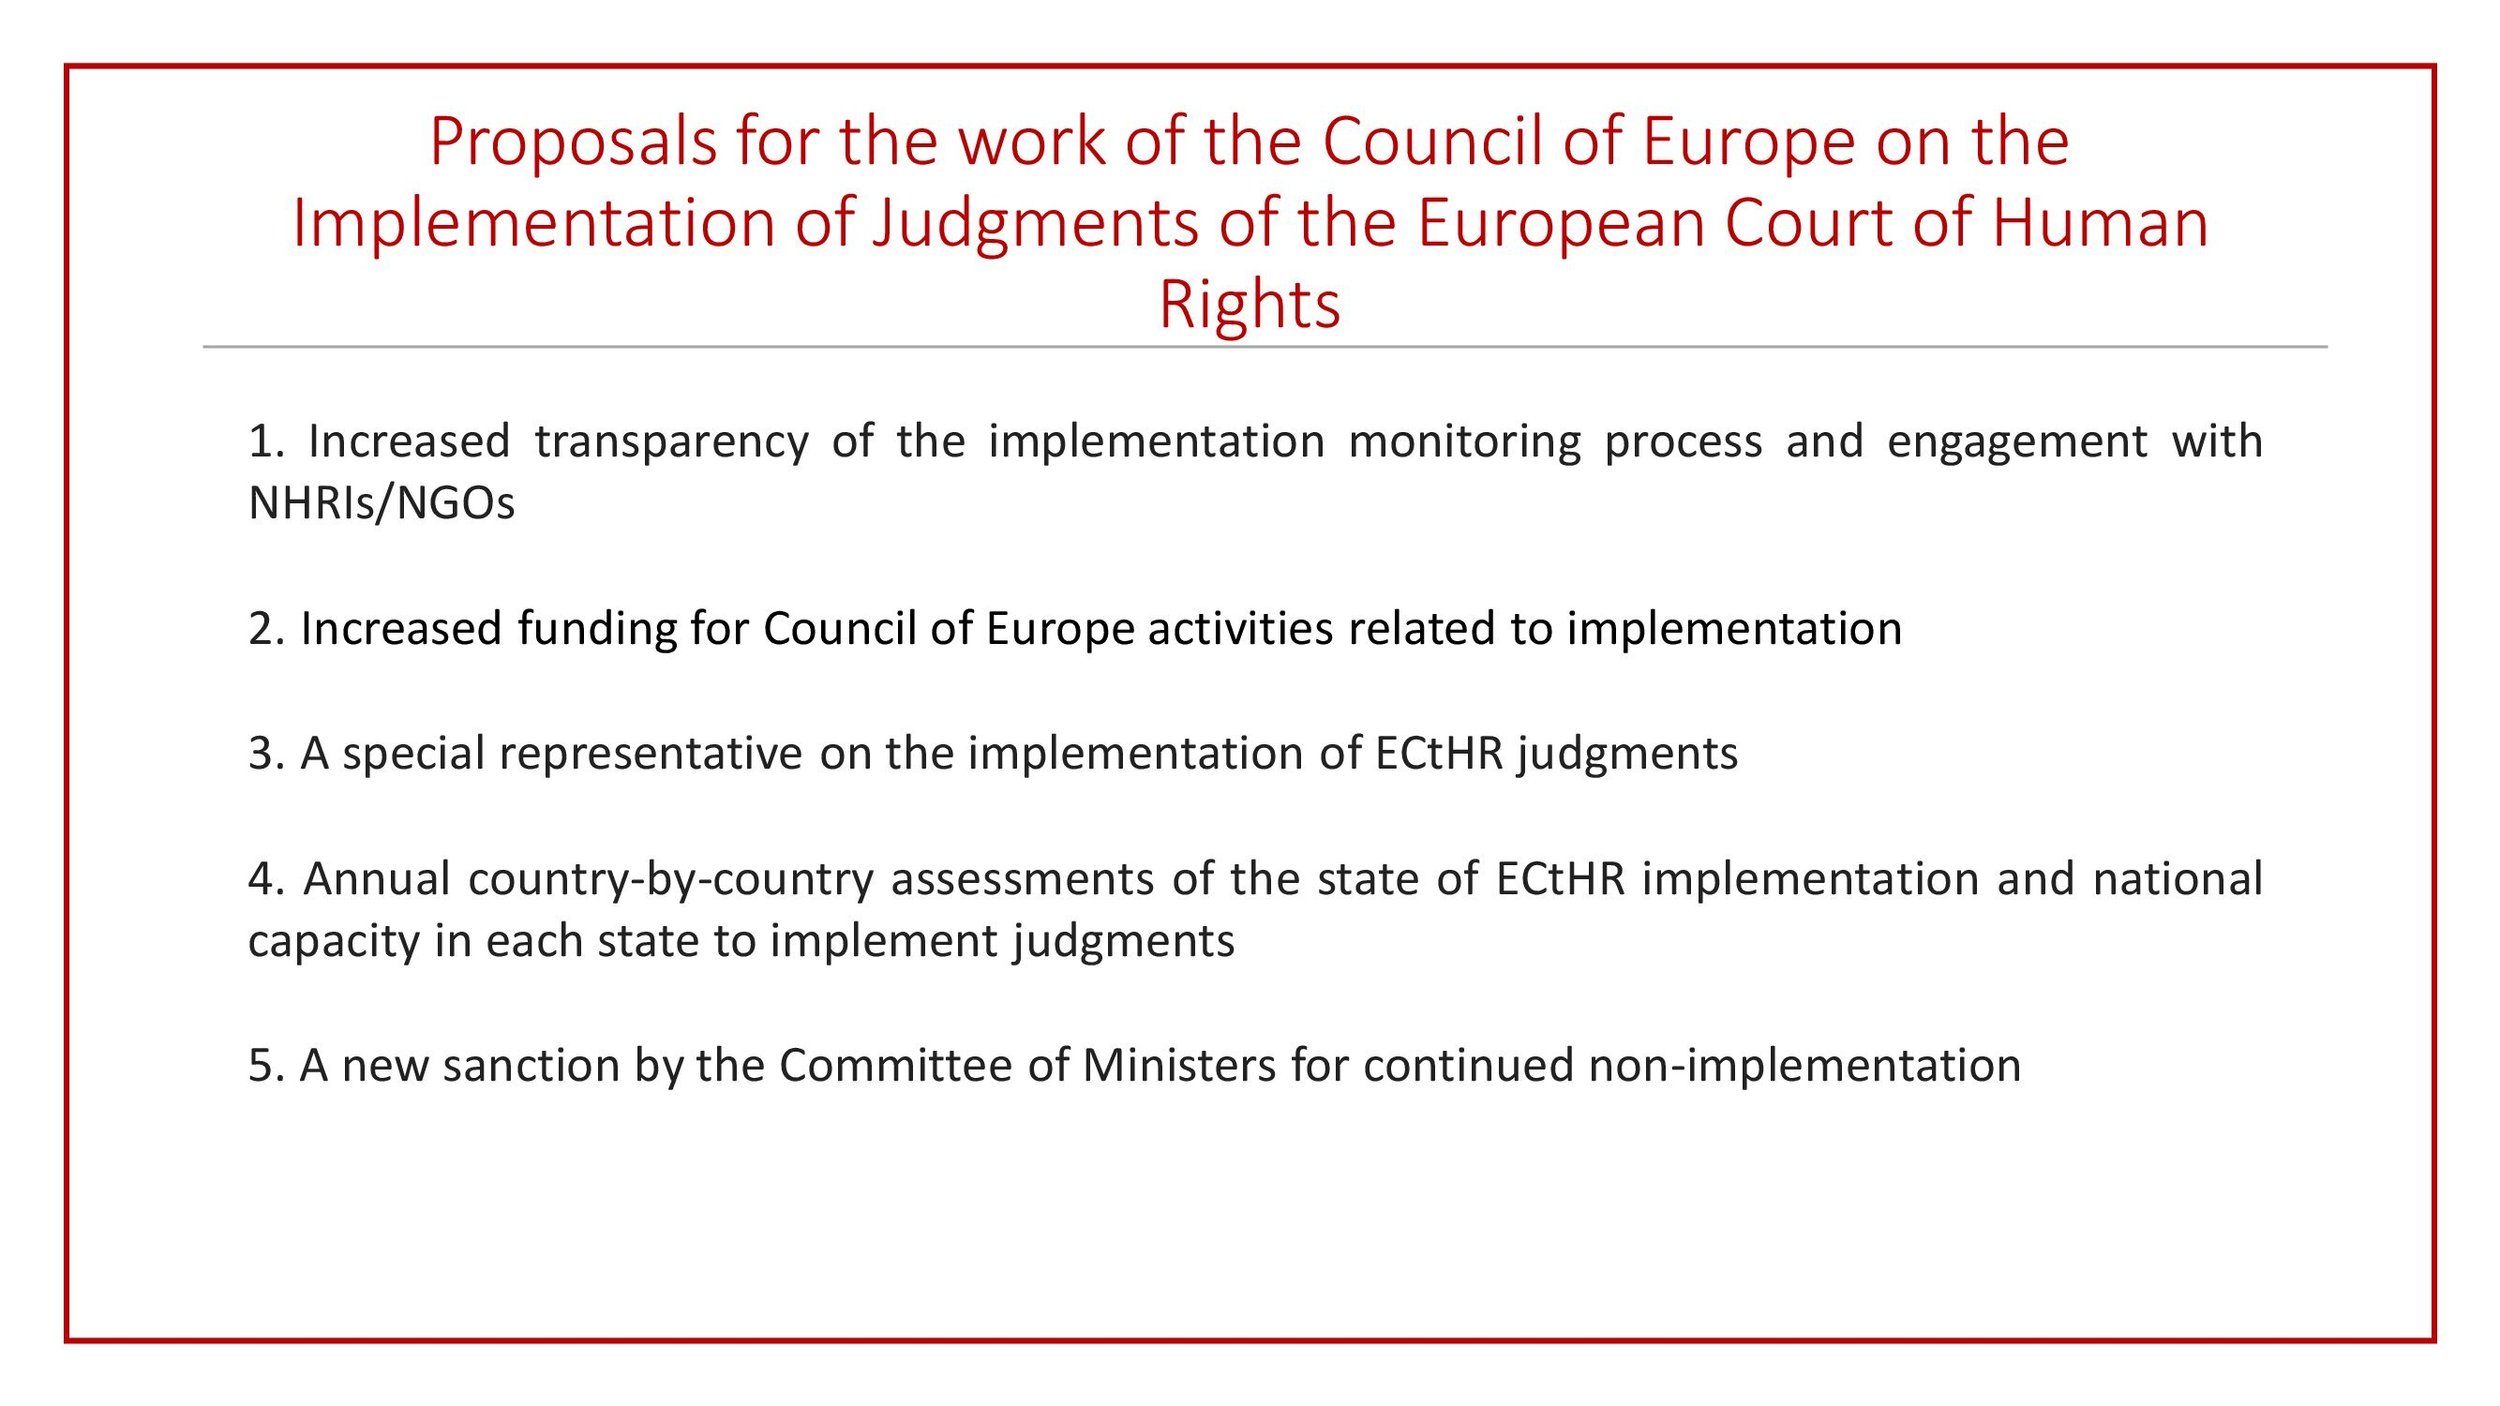 2022_06_The activities of the Council of Europe relating to the implementation of ECtHR judgments_updated_00003.jpg